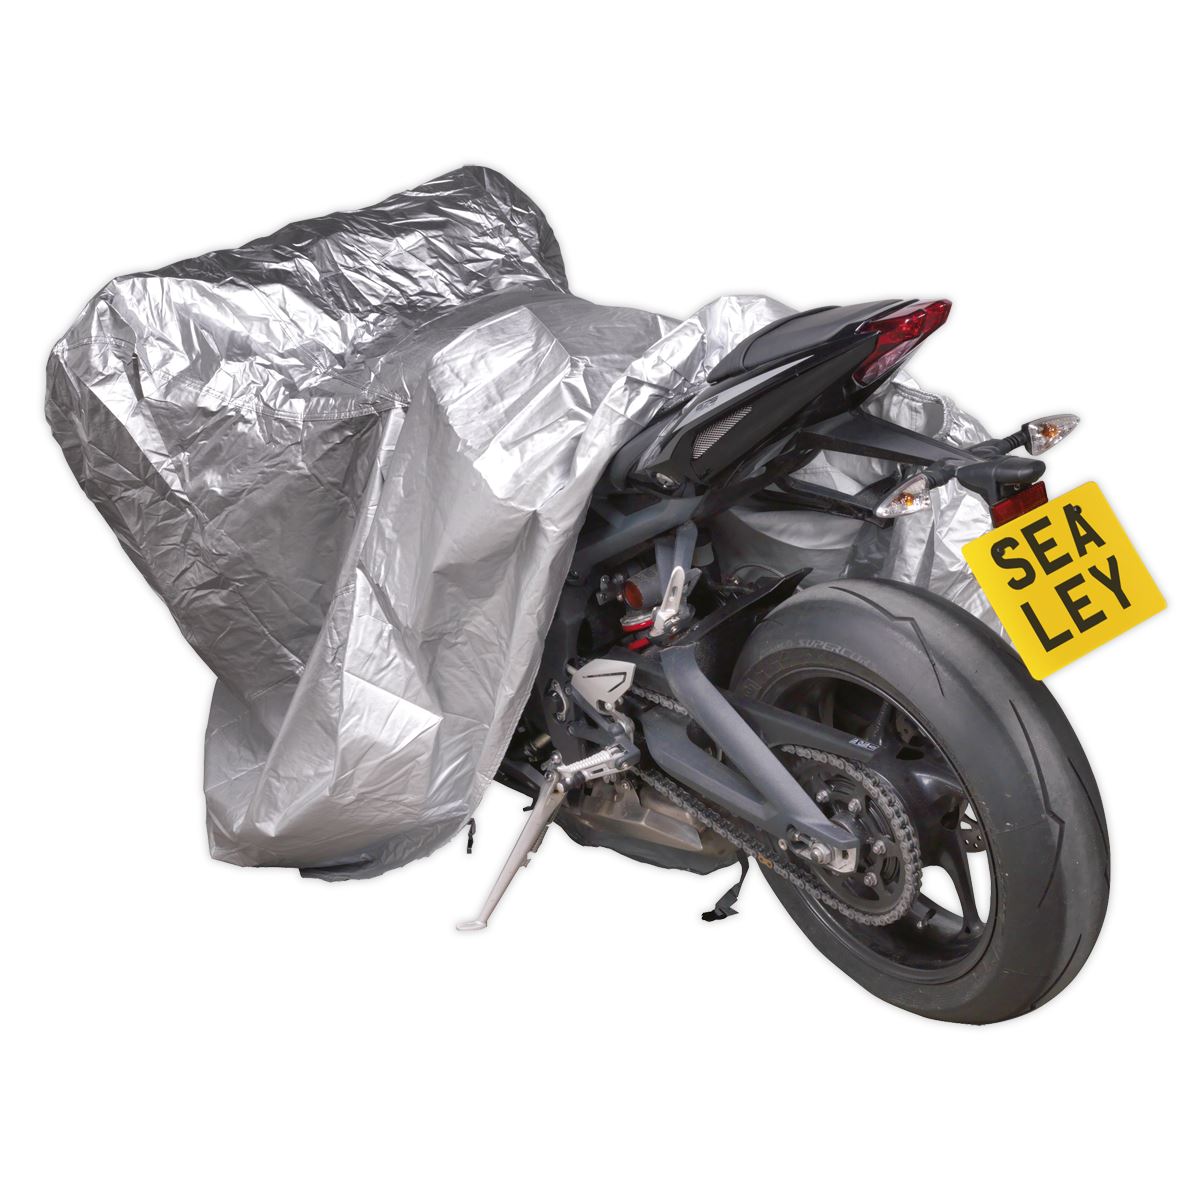 Sealey Motorcycle Cover 1830 x 890 x 1300mm - Small